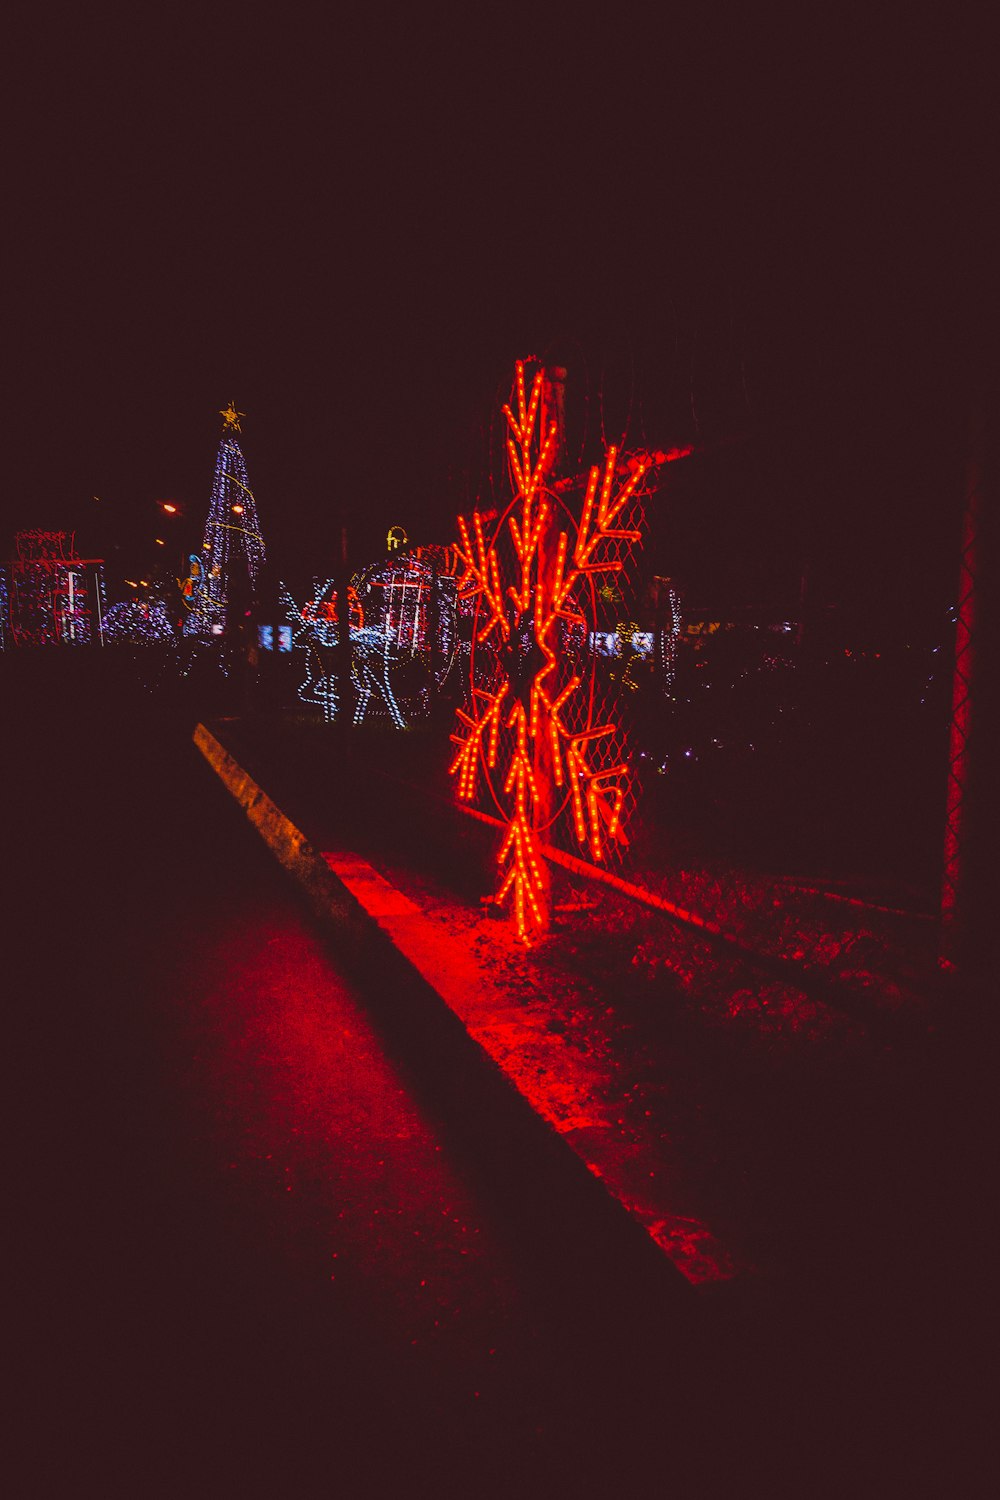 a lighted tree in the middle of a park at night